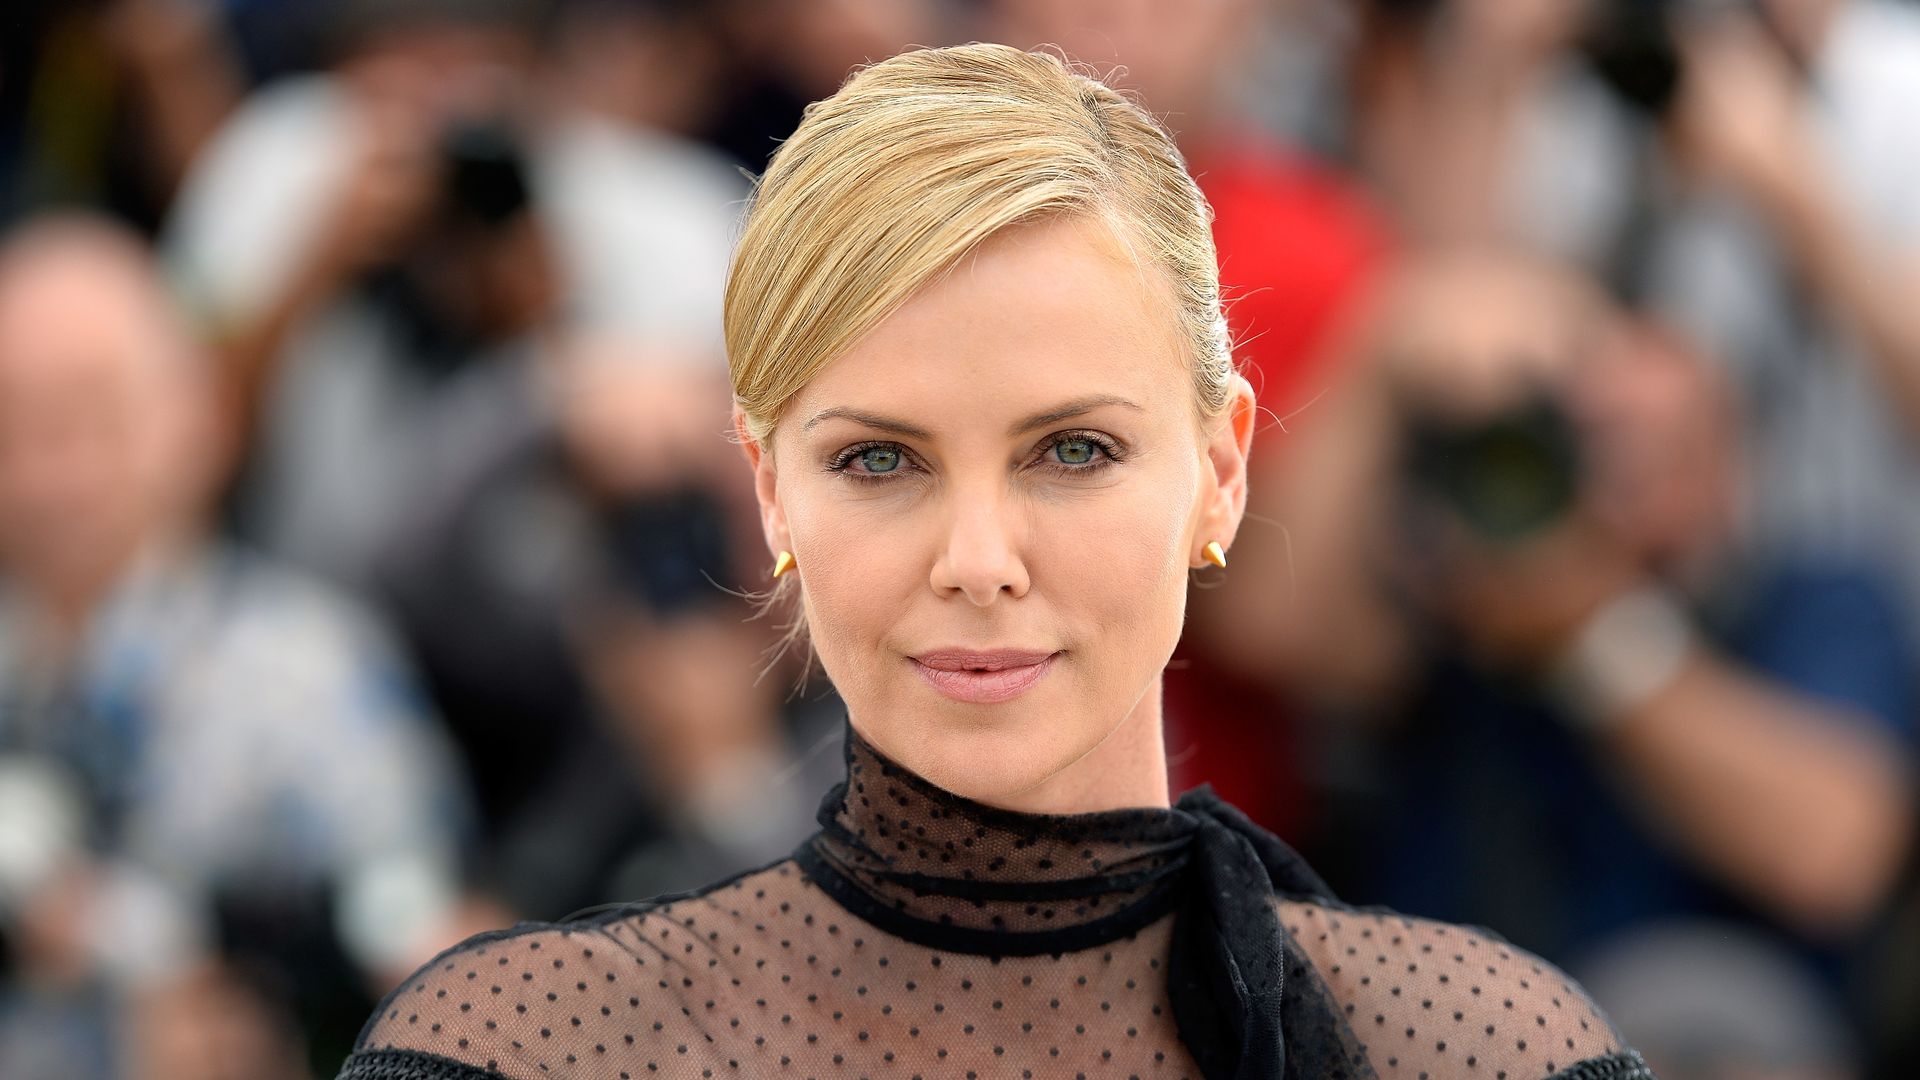 Charlize Theron attends a photocall for "Mad Max: Fury Road" during the 68th annual Cannes Film Festival